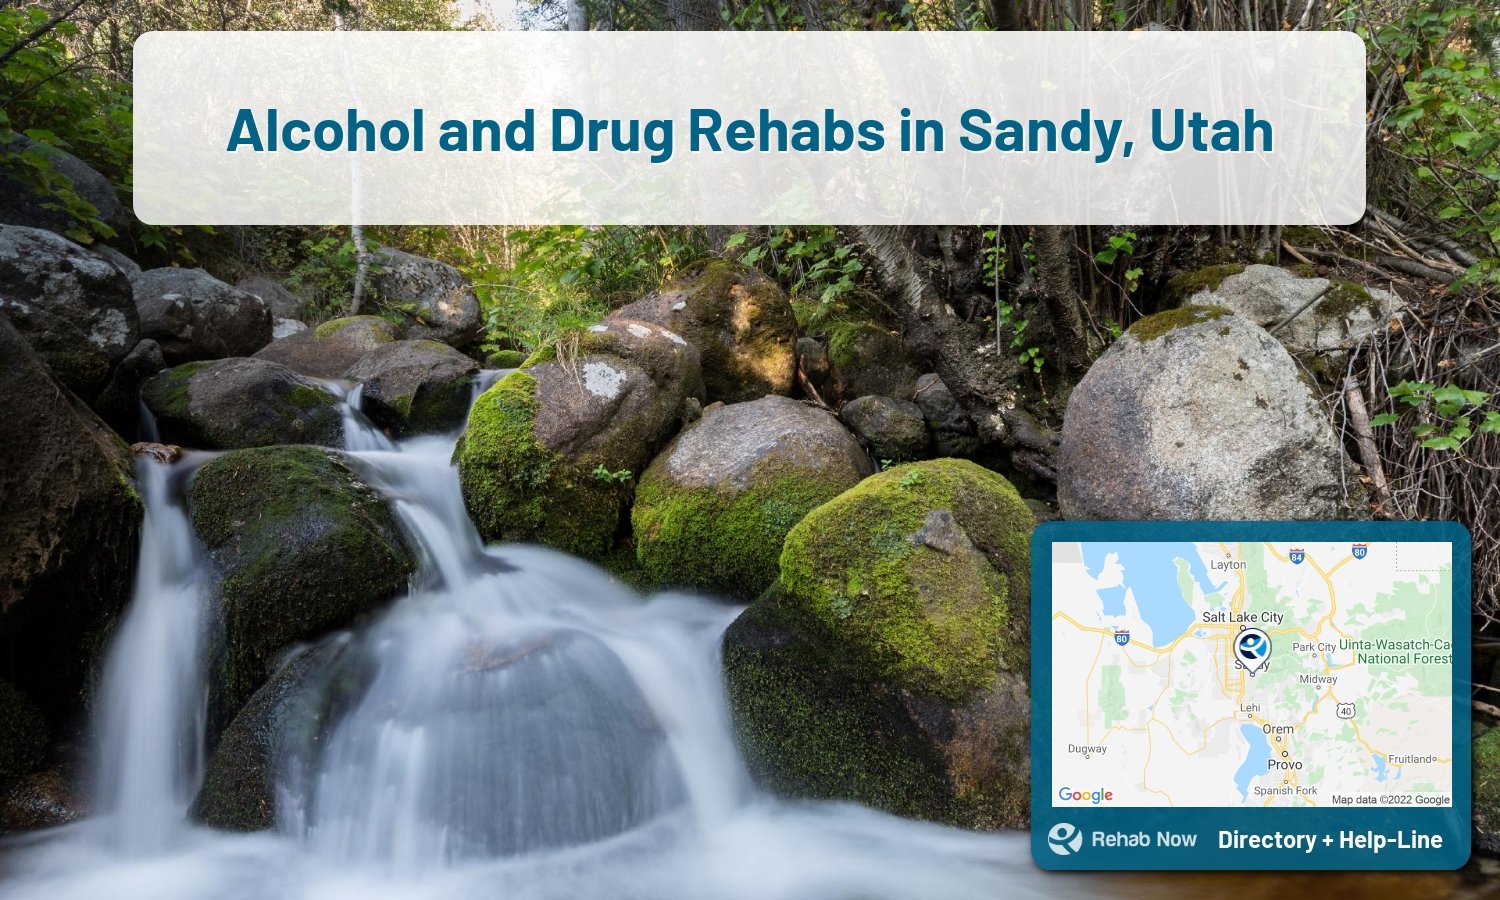 Need treatment nearby in Sandy, Utah? Choose a drug/alcohol rehab center from our list, or call our hotline now for free help.